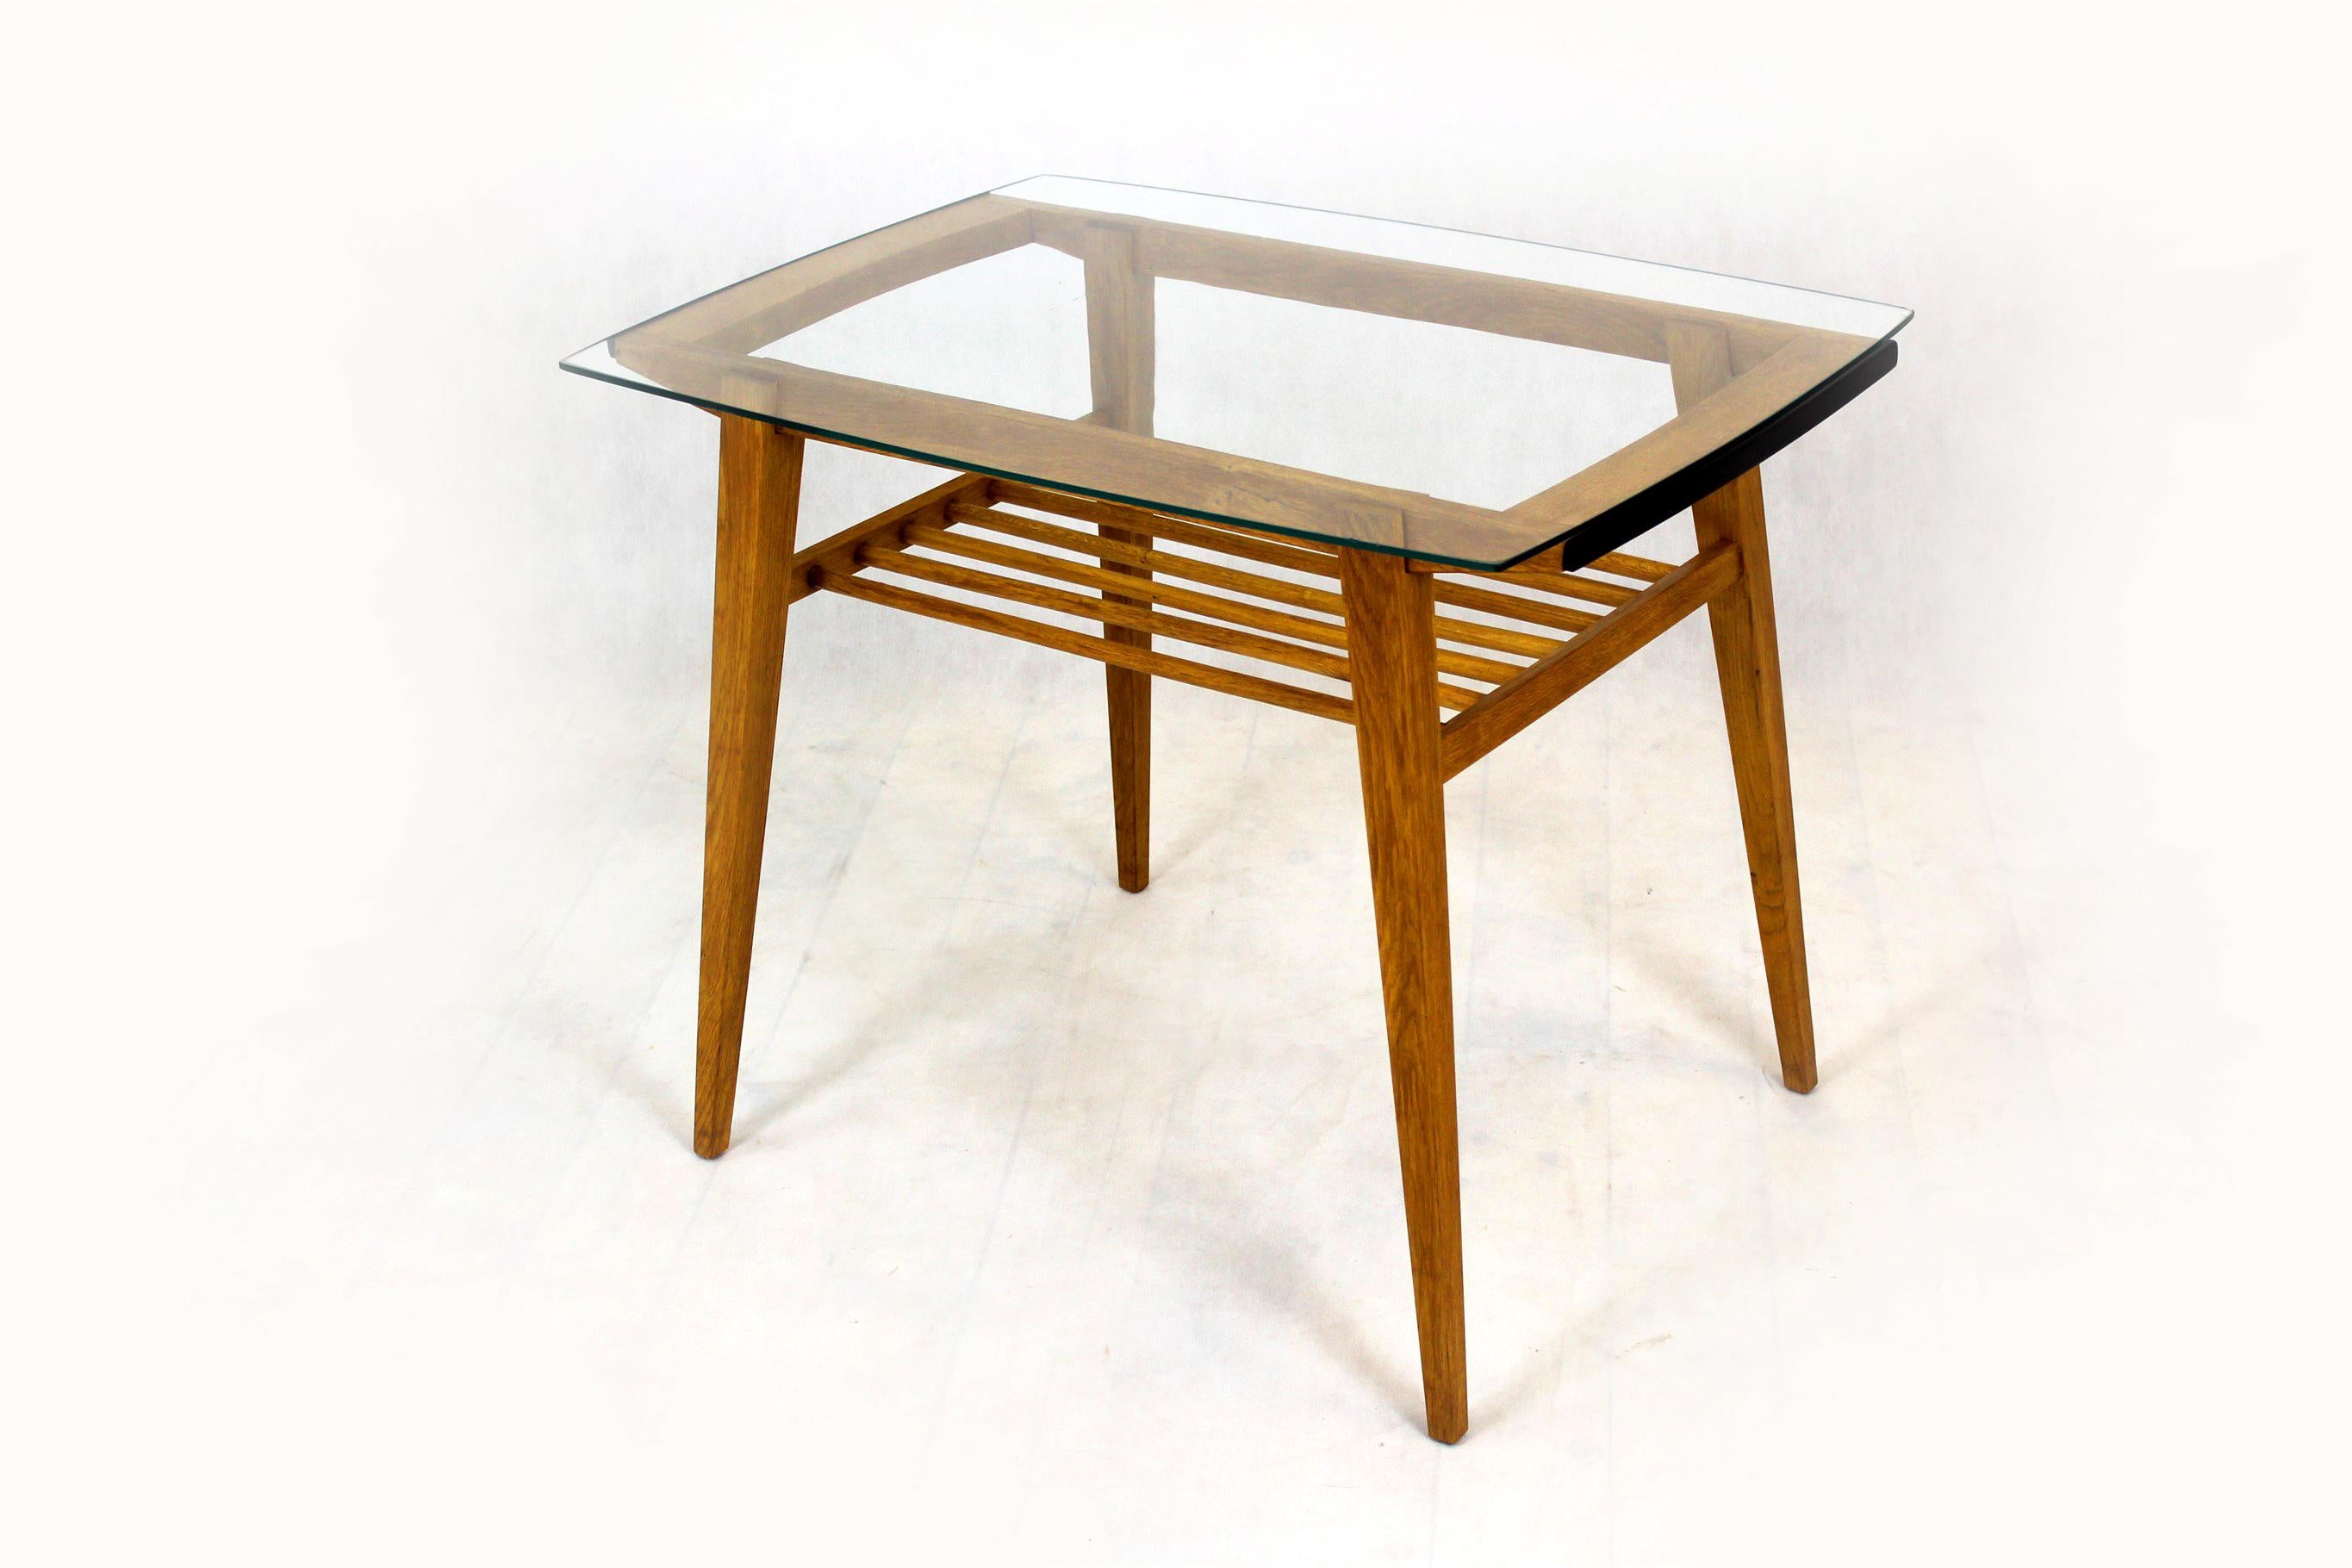 Restored Wooden Coffee Table with Glass Top from Druzstvo, 1960s For Sale 8